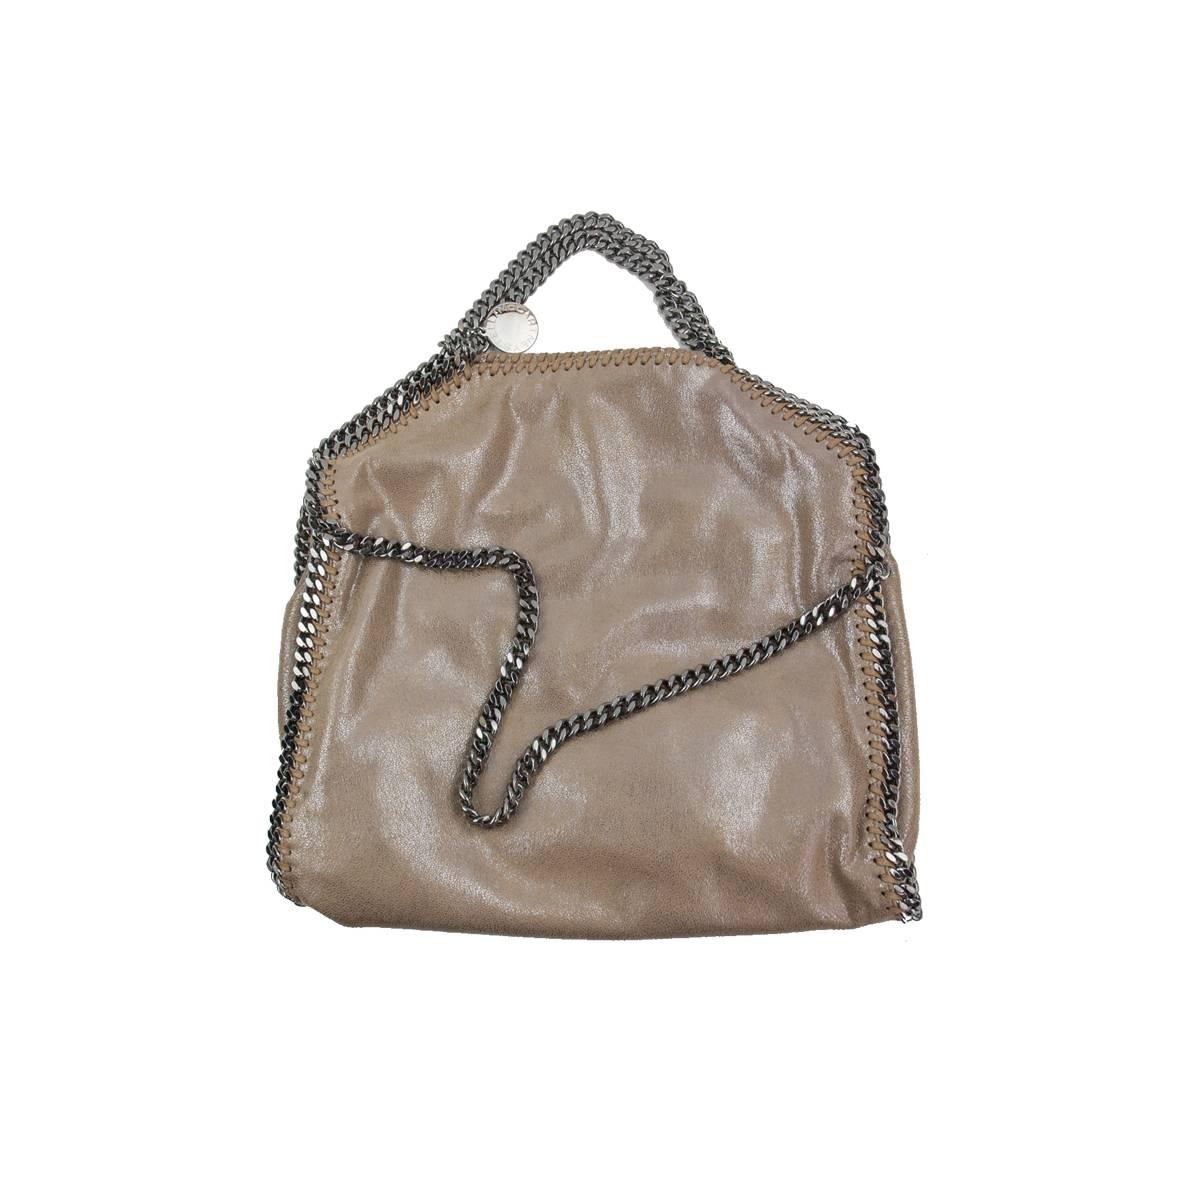 Beautiful and as new Stella McCartney bag
Falabella Cham Fover three chains
Eco leather
Three chains
Beige color
Button closure
Internal zip pocket
Cm 36 x 37 (14.1 x 14.5 inches)
Worldwide express shipping included in the price !